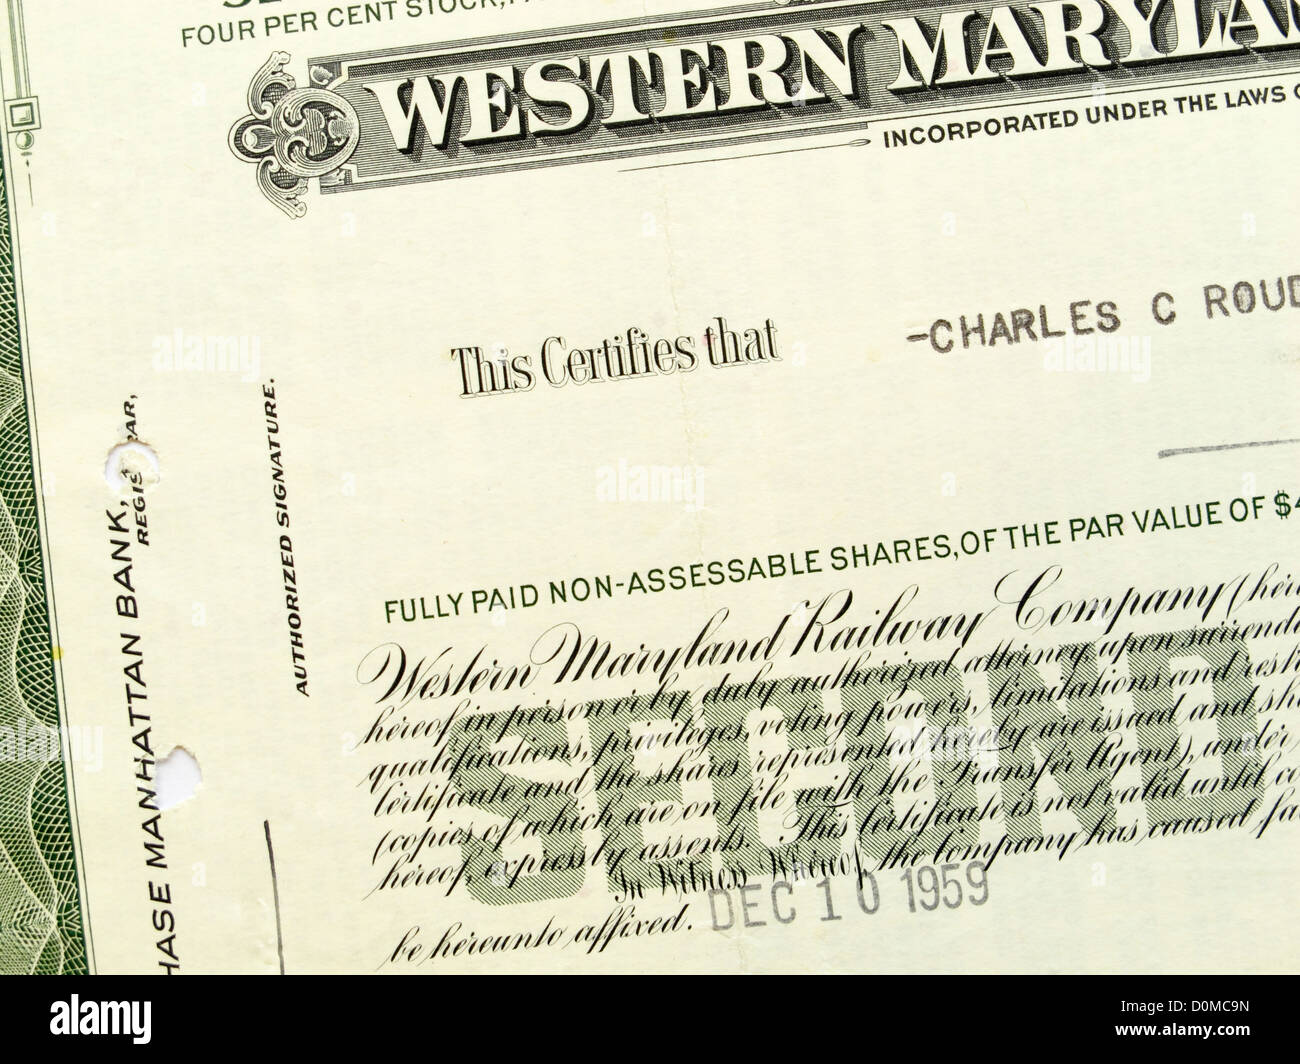 Share certificate of the Western Maryland Railway Company no longer in existence Stock Photo